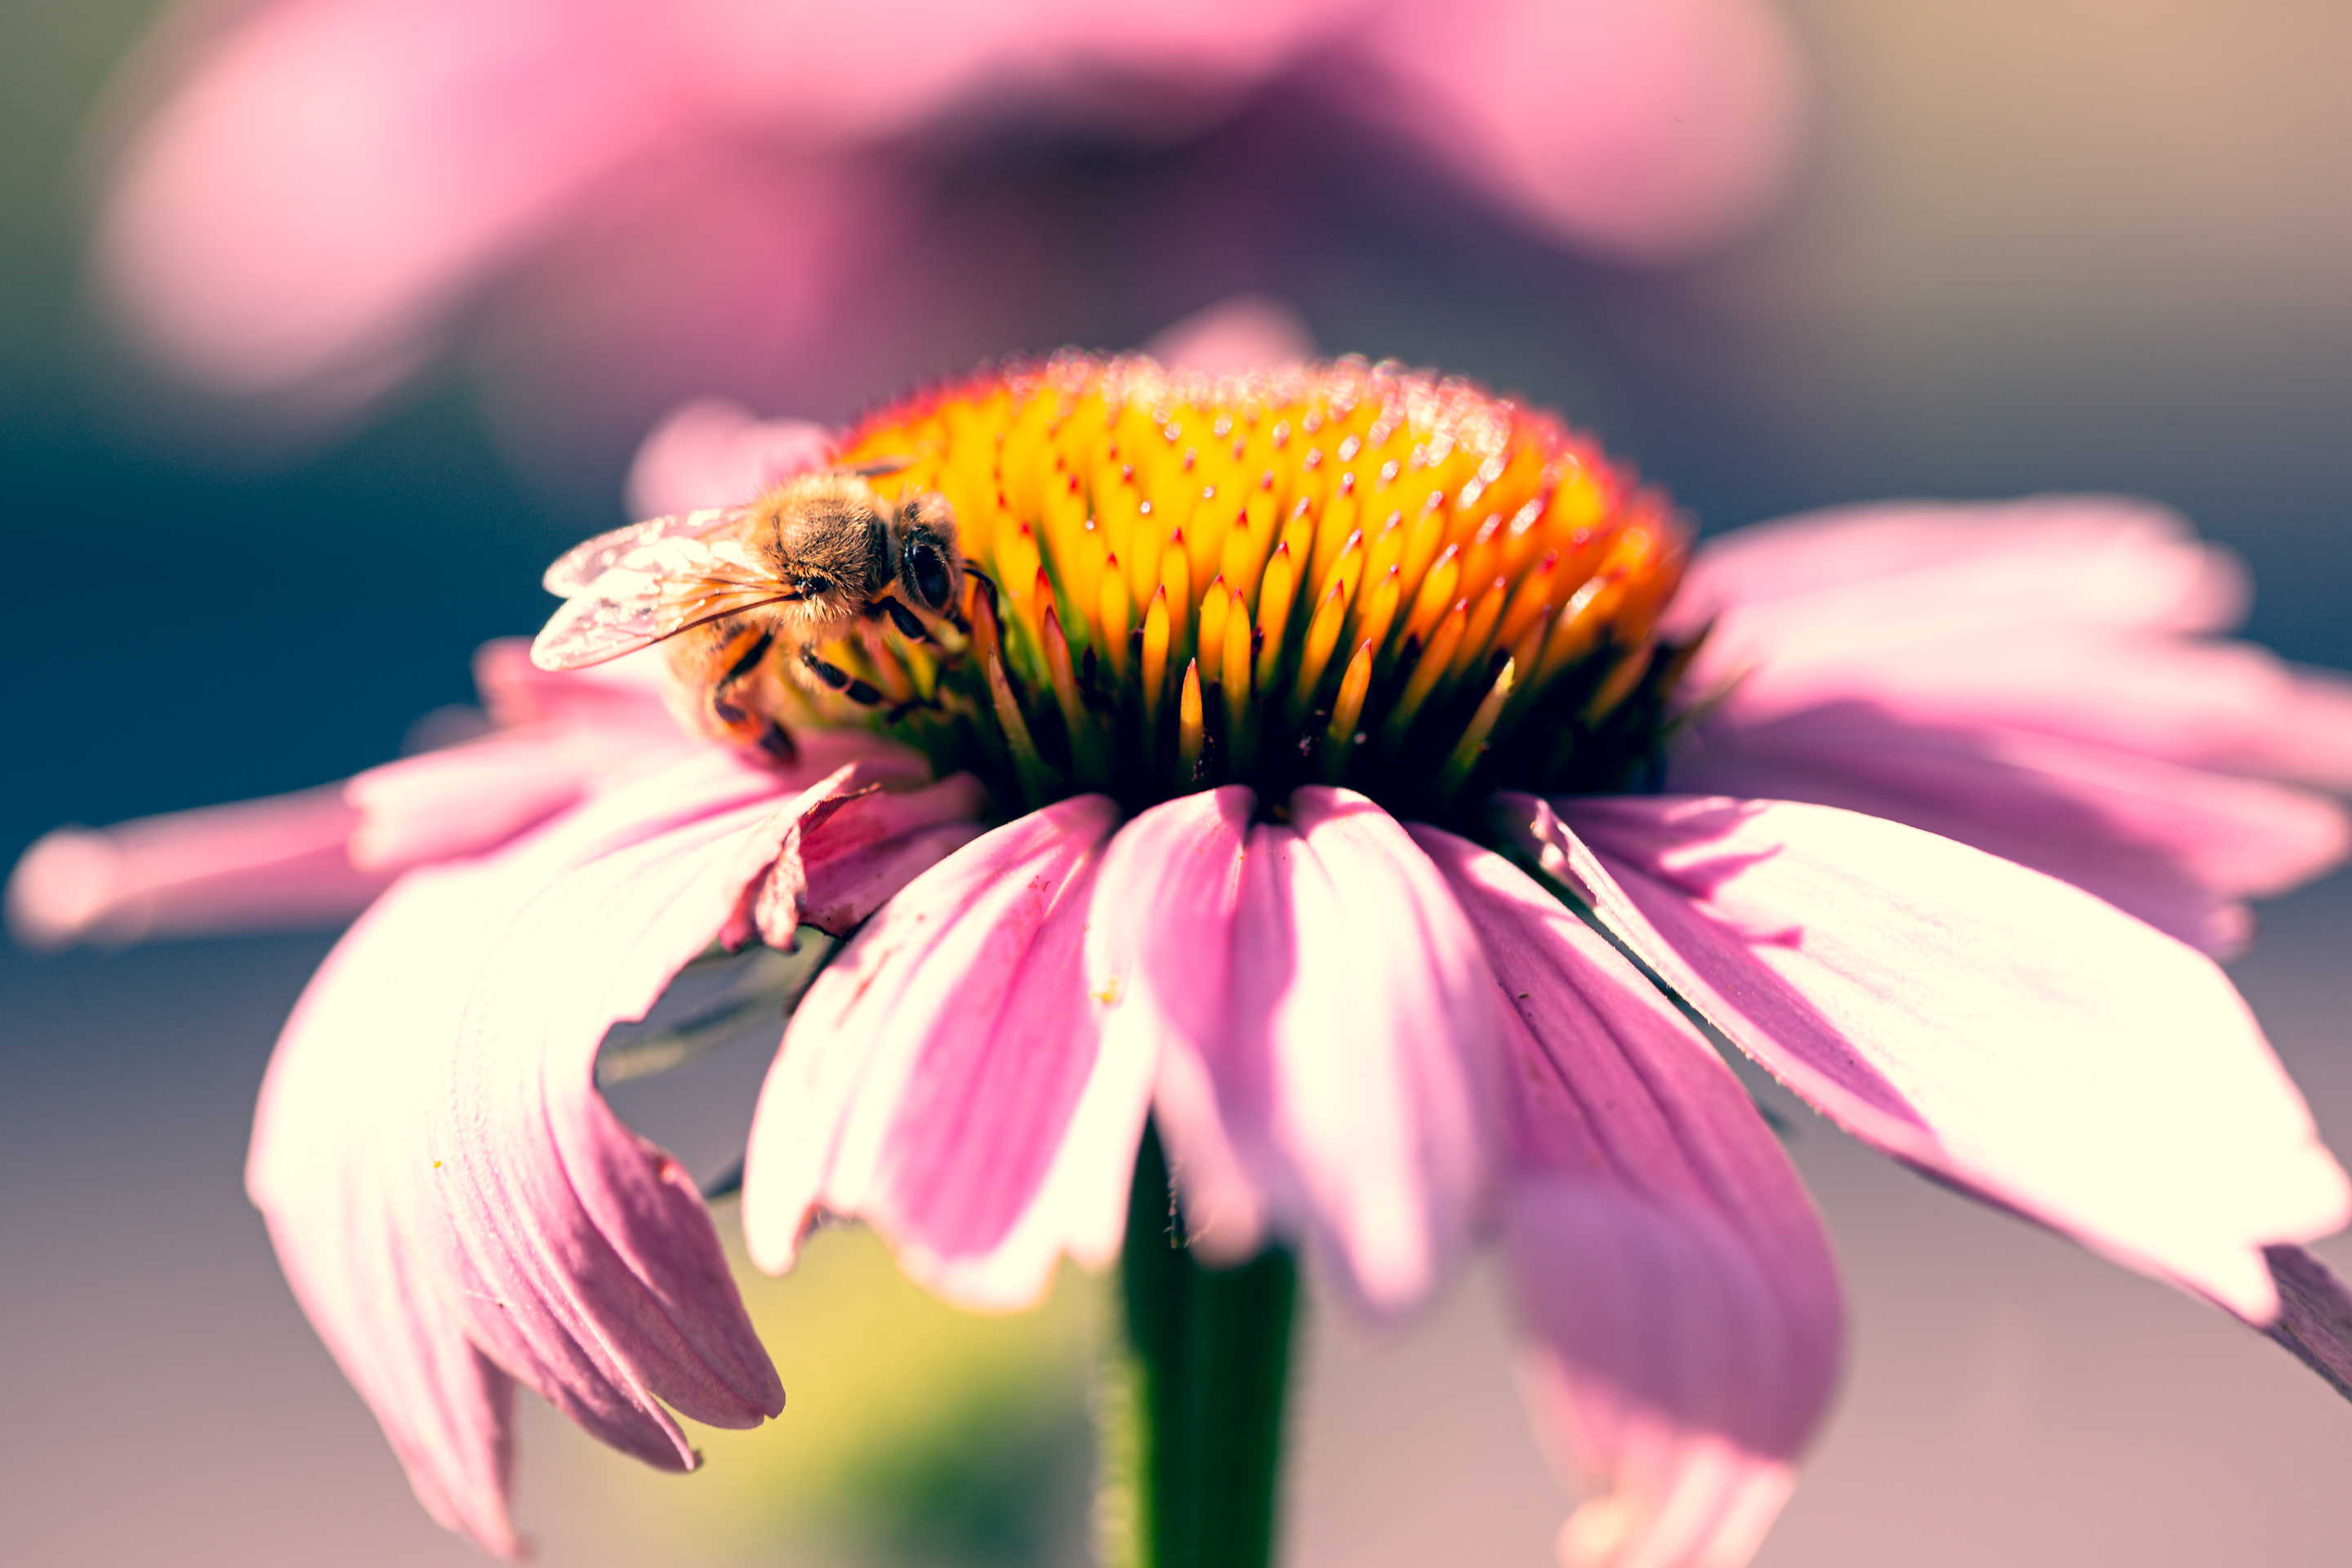 100mm high key macro photograph of a honey bee feeding and pollinating a purple coneflower blossom.